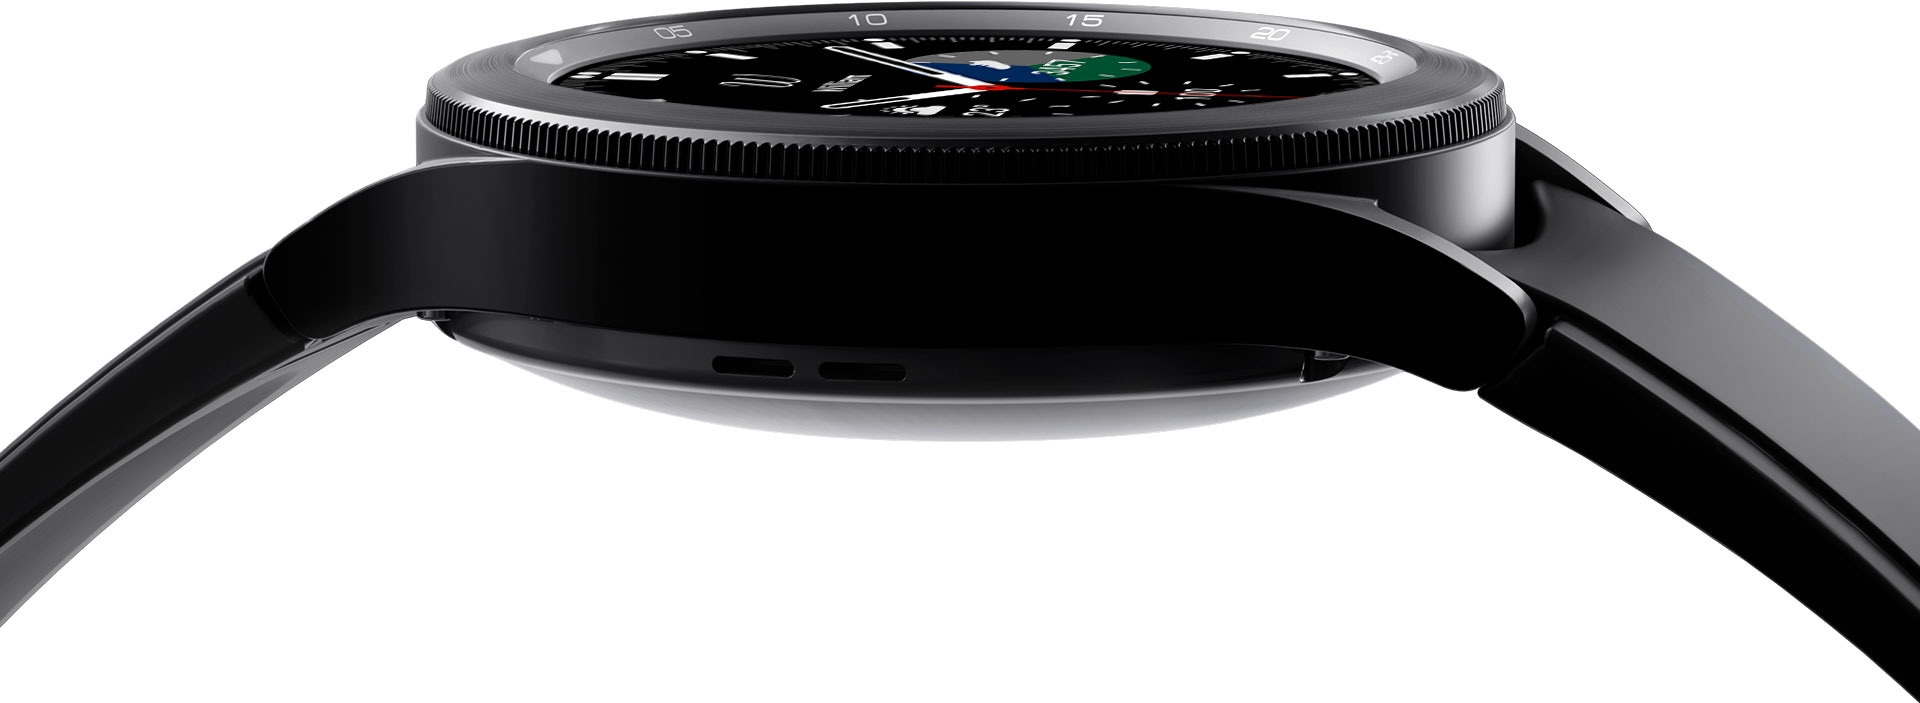 The Galaxy Watch4 Classic device's body is shown in a close-up, with focus on the details of its bezel.